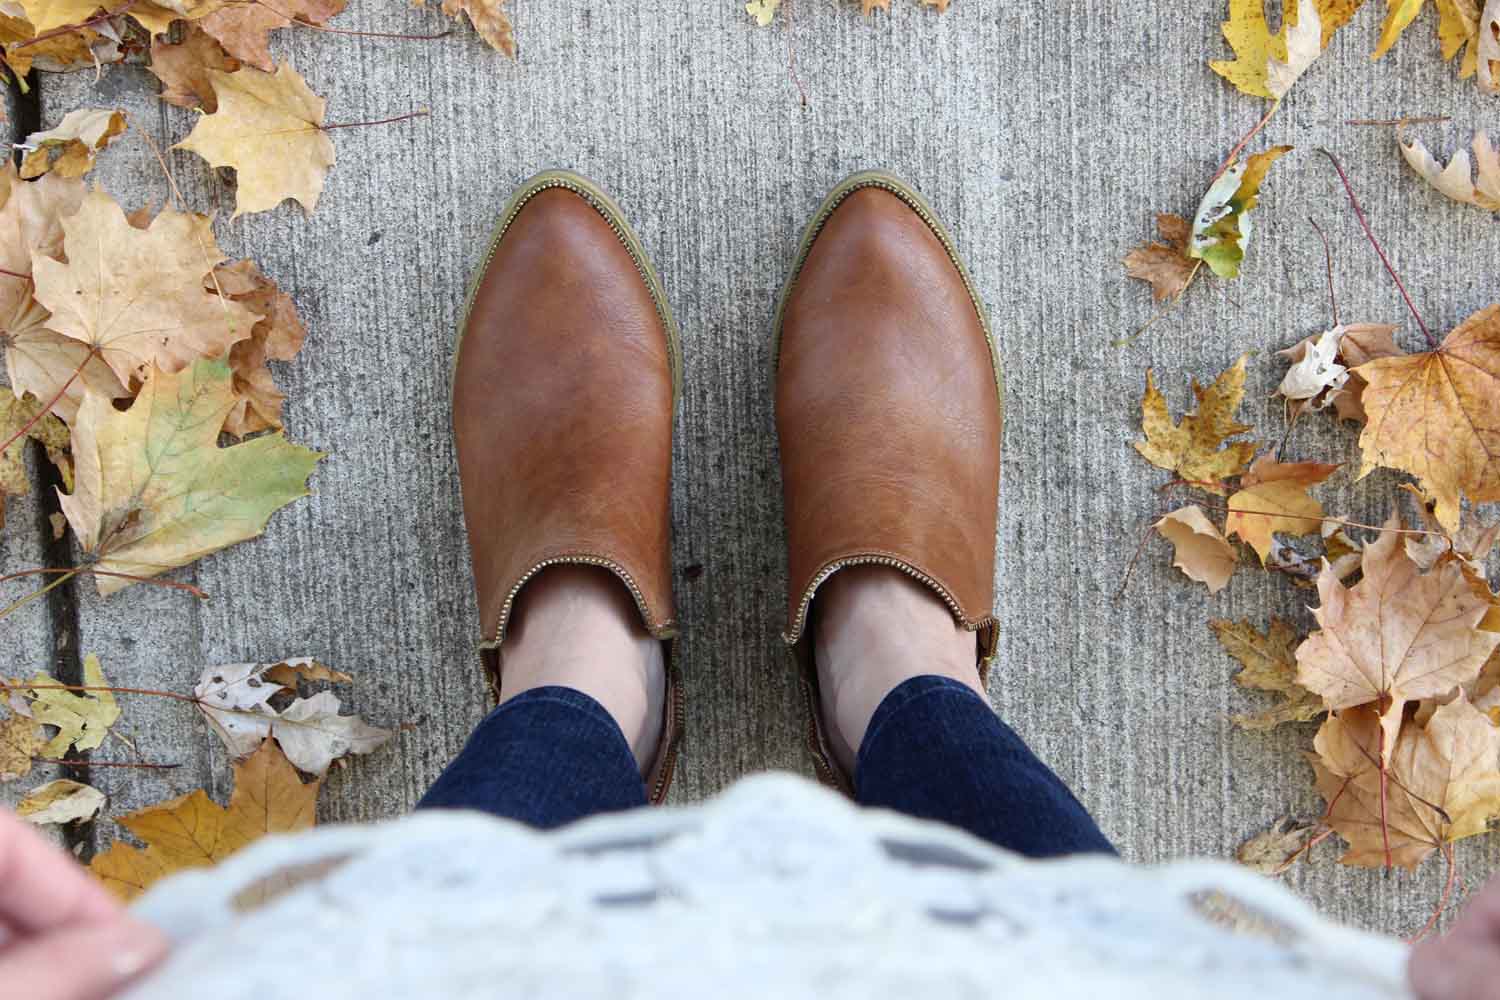 Fall Booties and Leaves